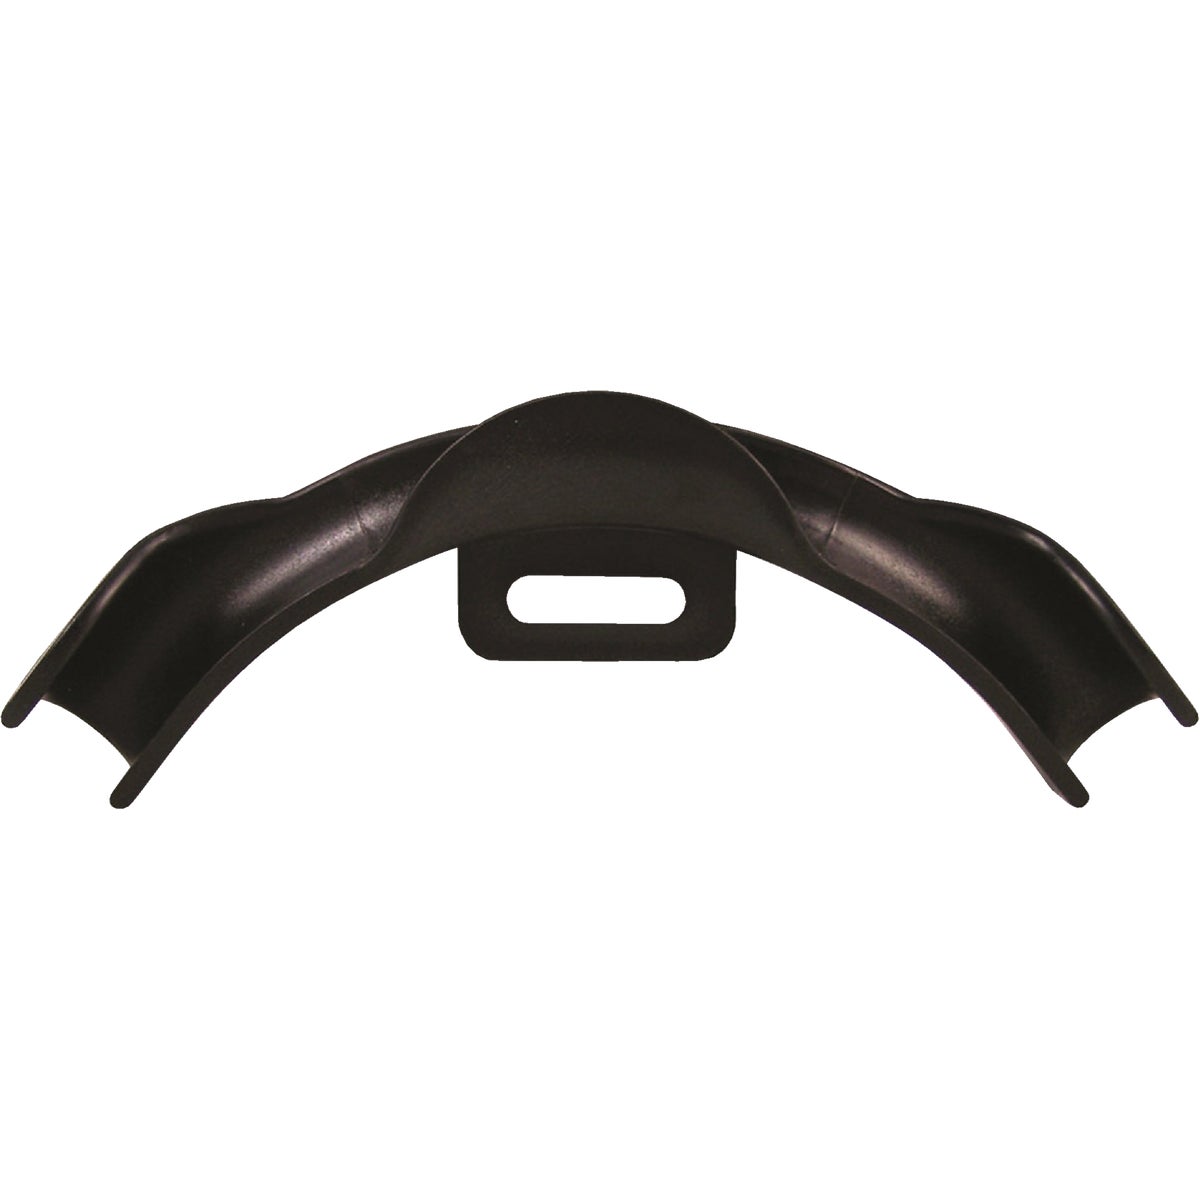 Tubing Support Bend